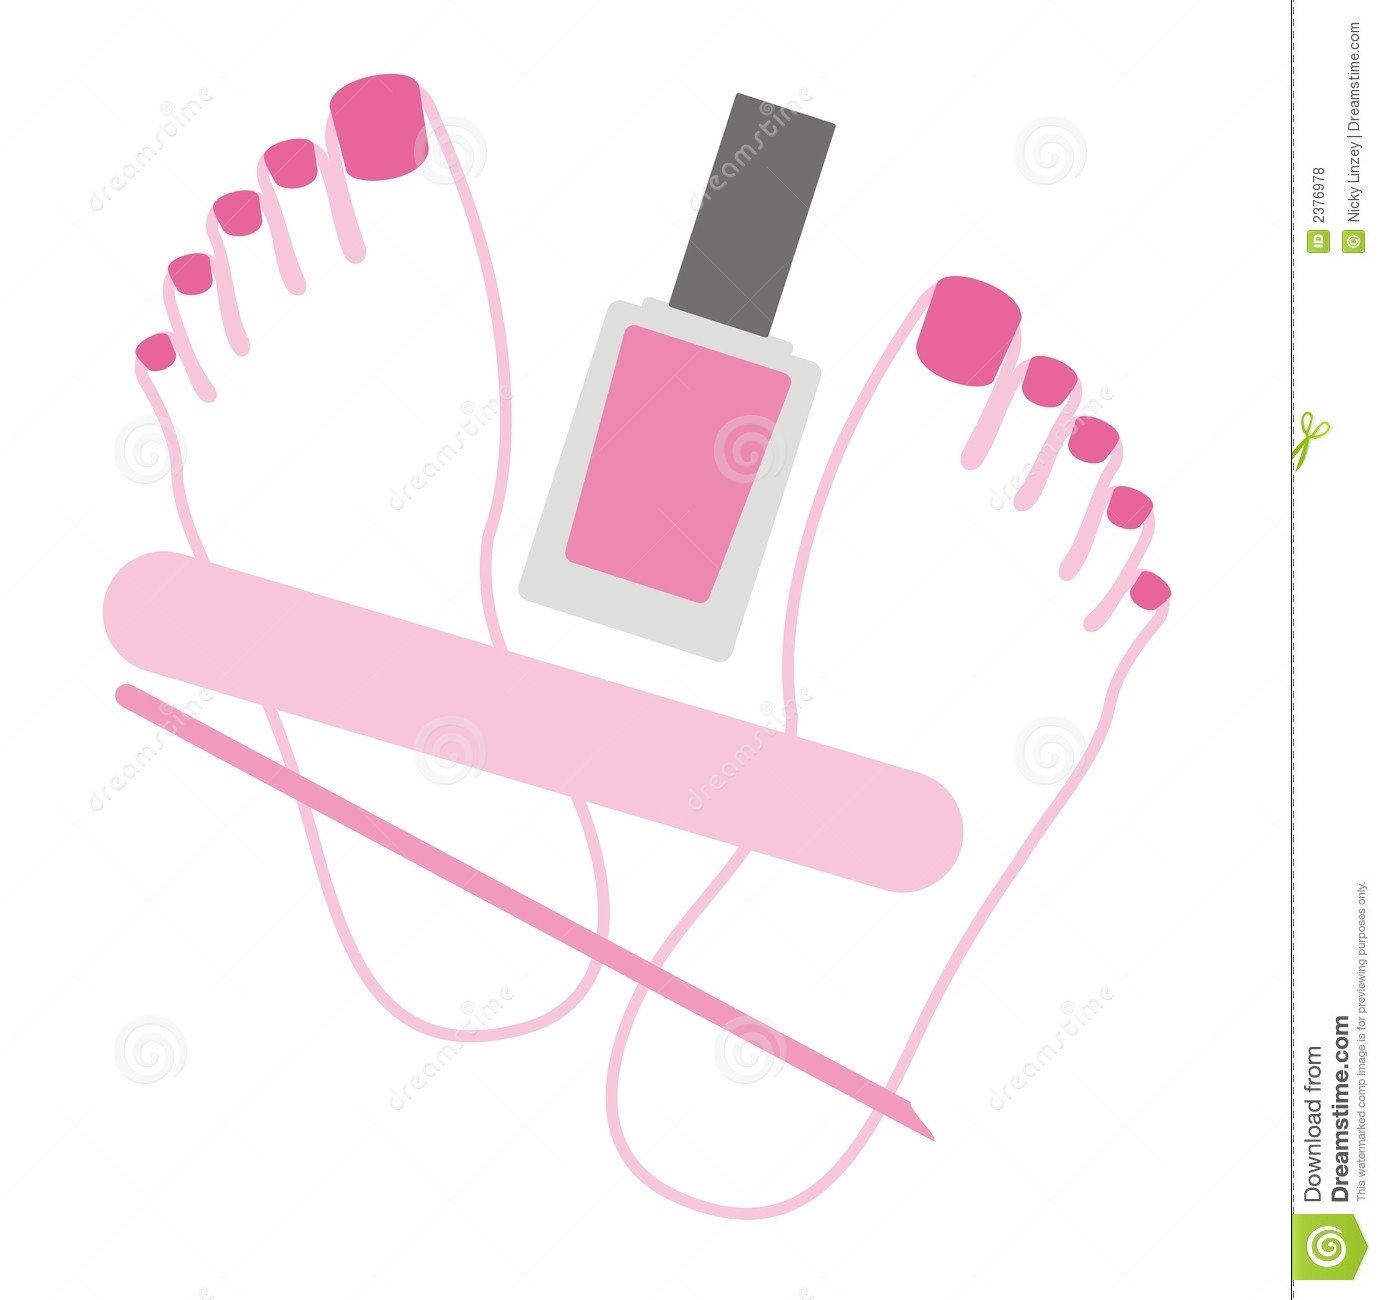 Maniküre Clipart
 Nails clipart pedicure Pencil and in color nails clipart